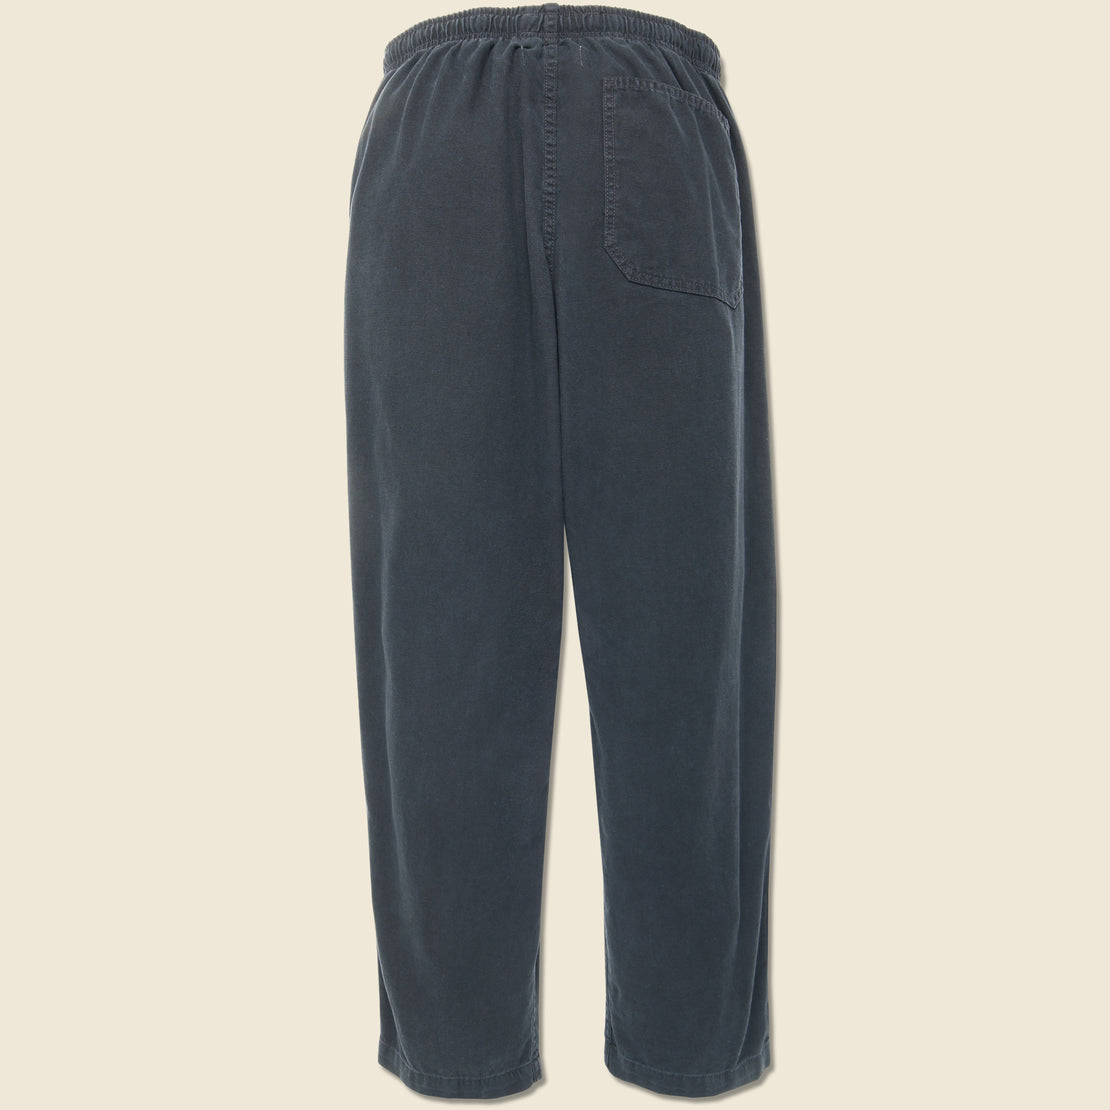 Ventura Chore Pant - Faded Black - Imogene + Willie - STAG Provisions - Pants - Twill